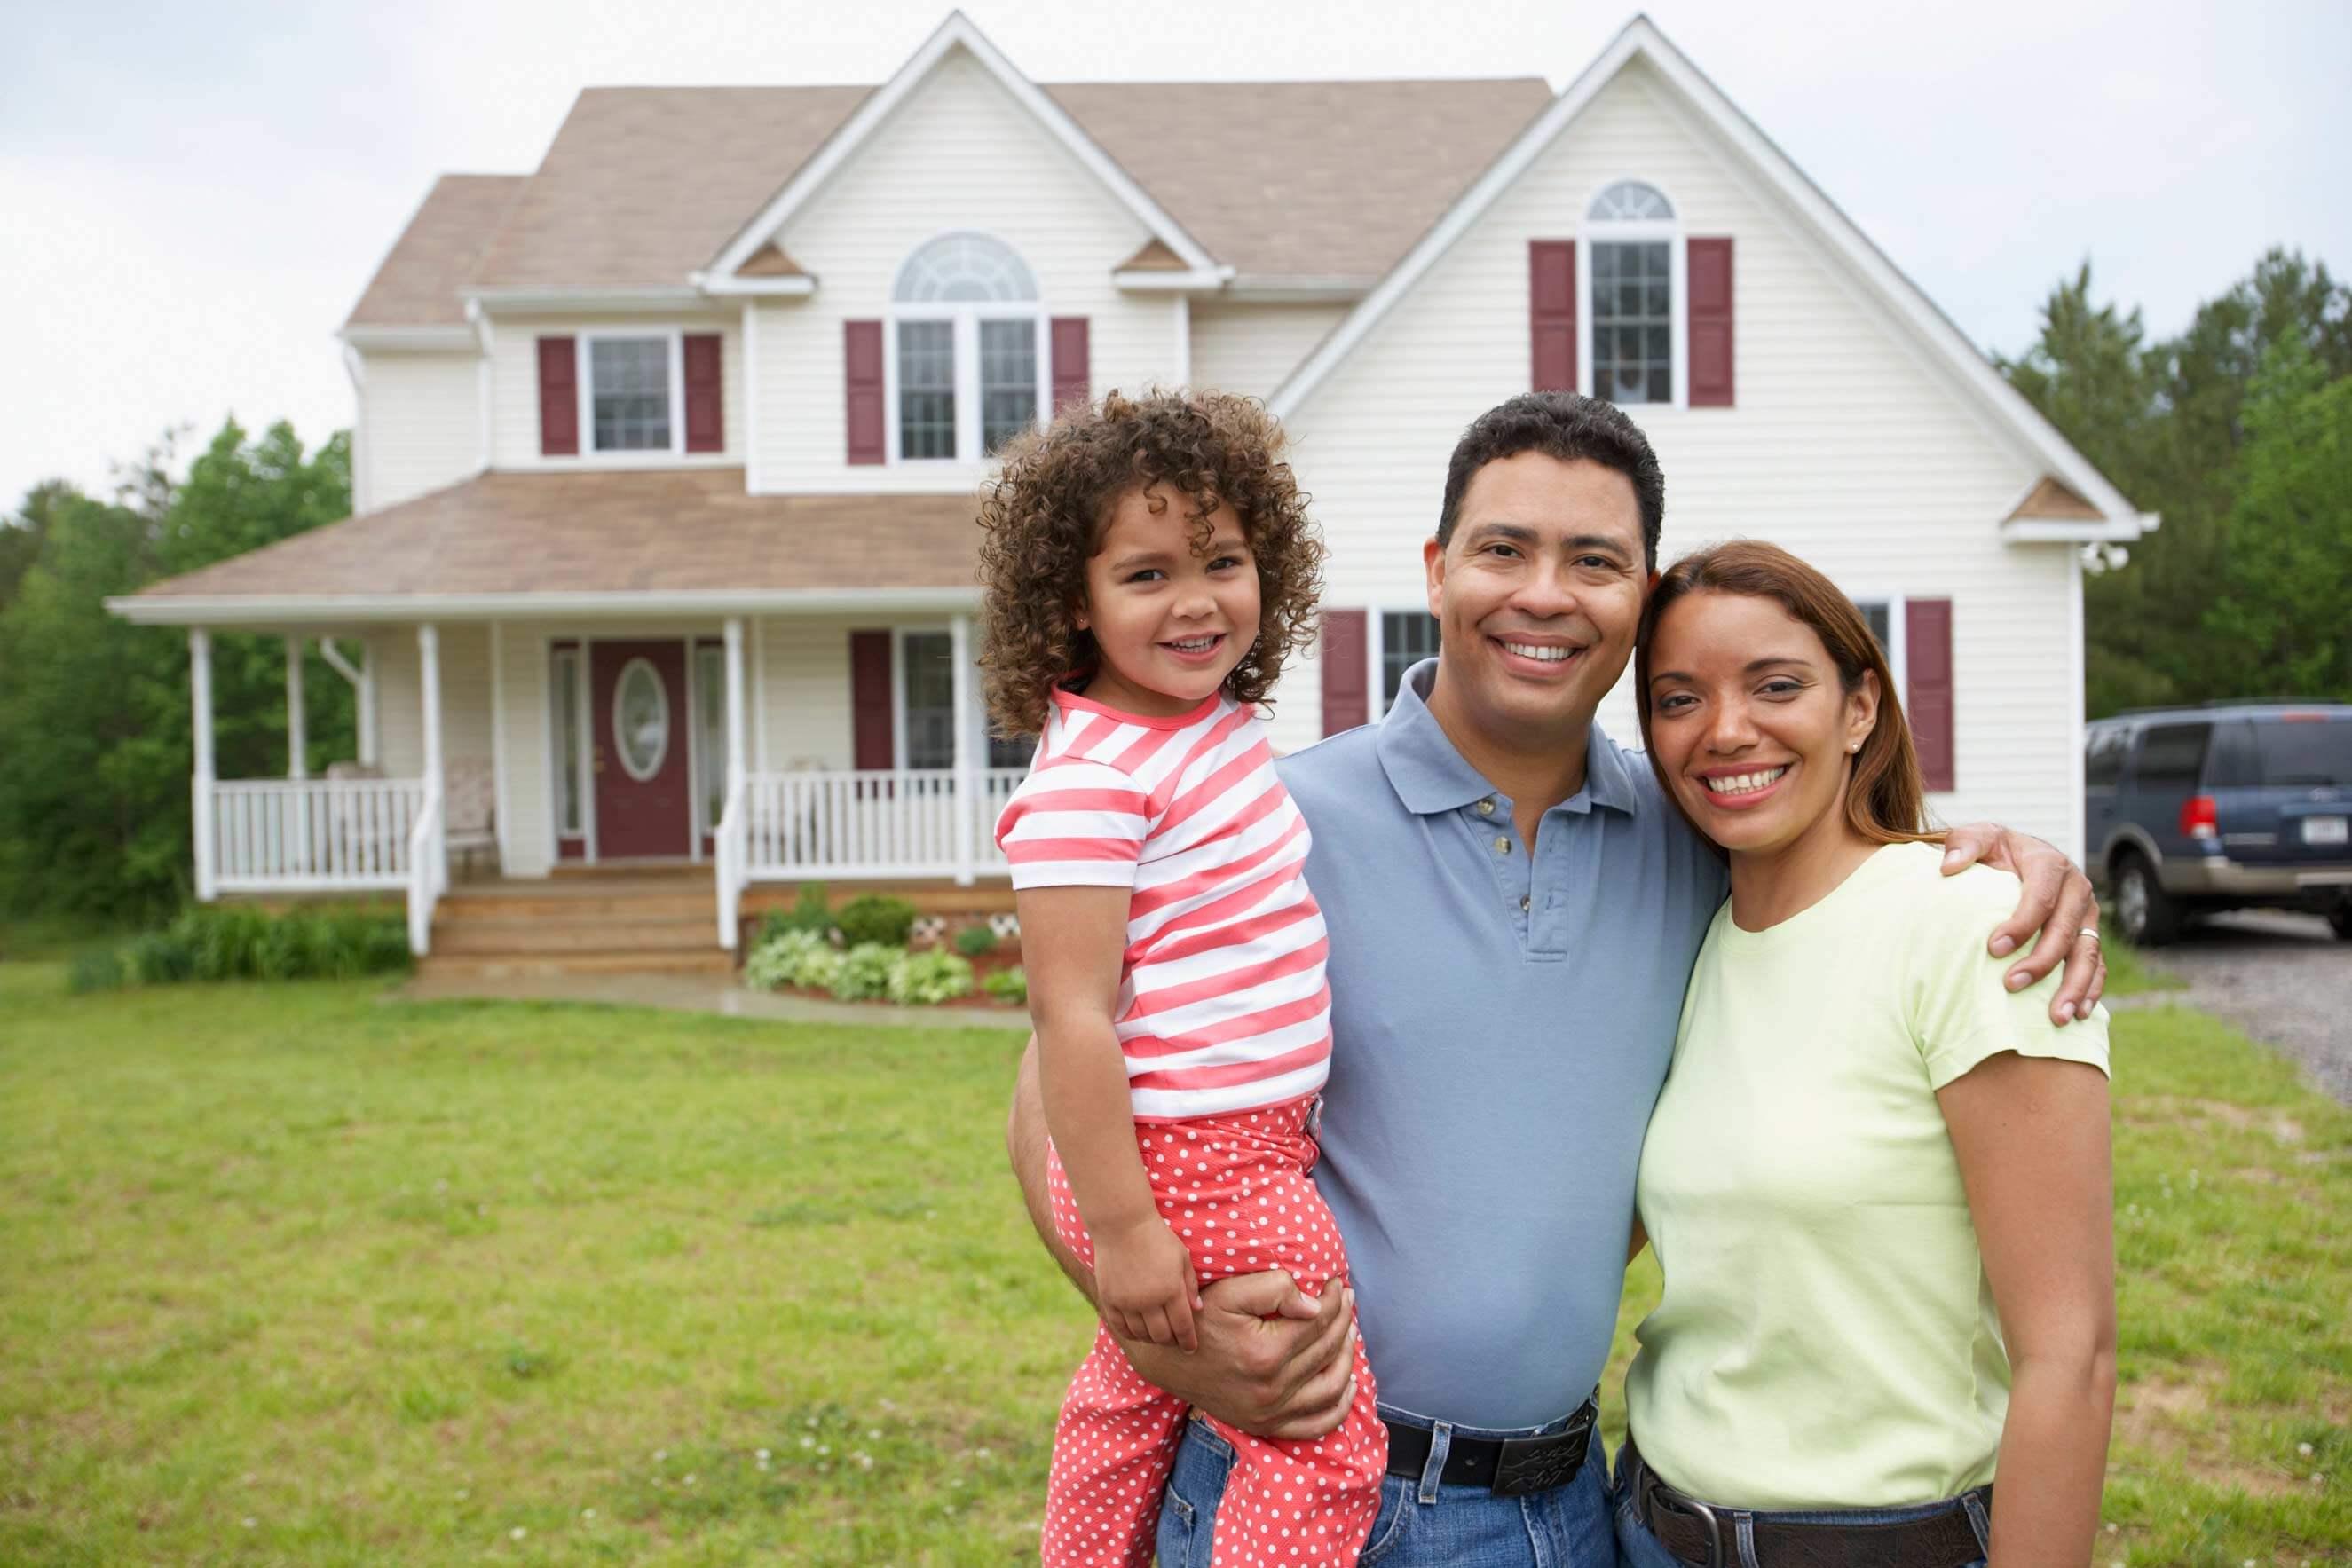 Family of three standing in front of a single family home